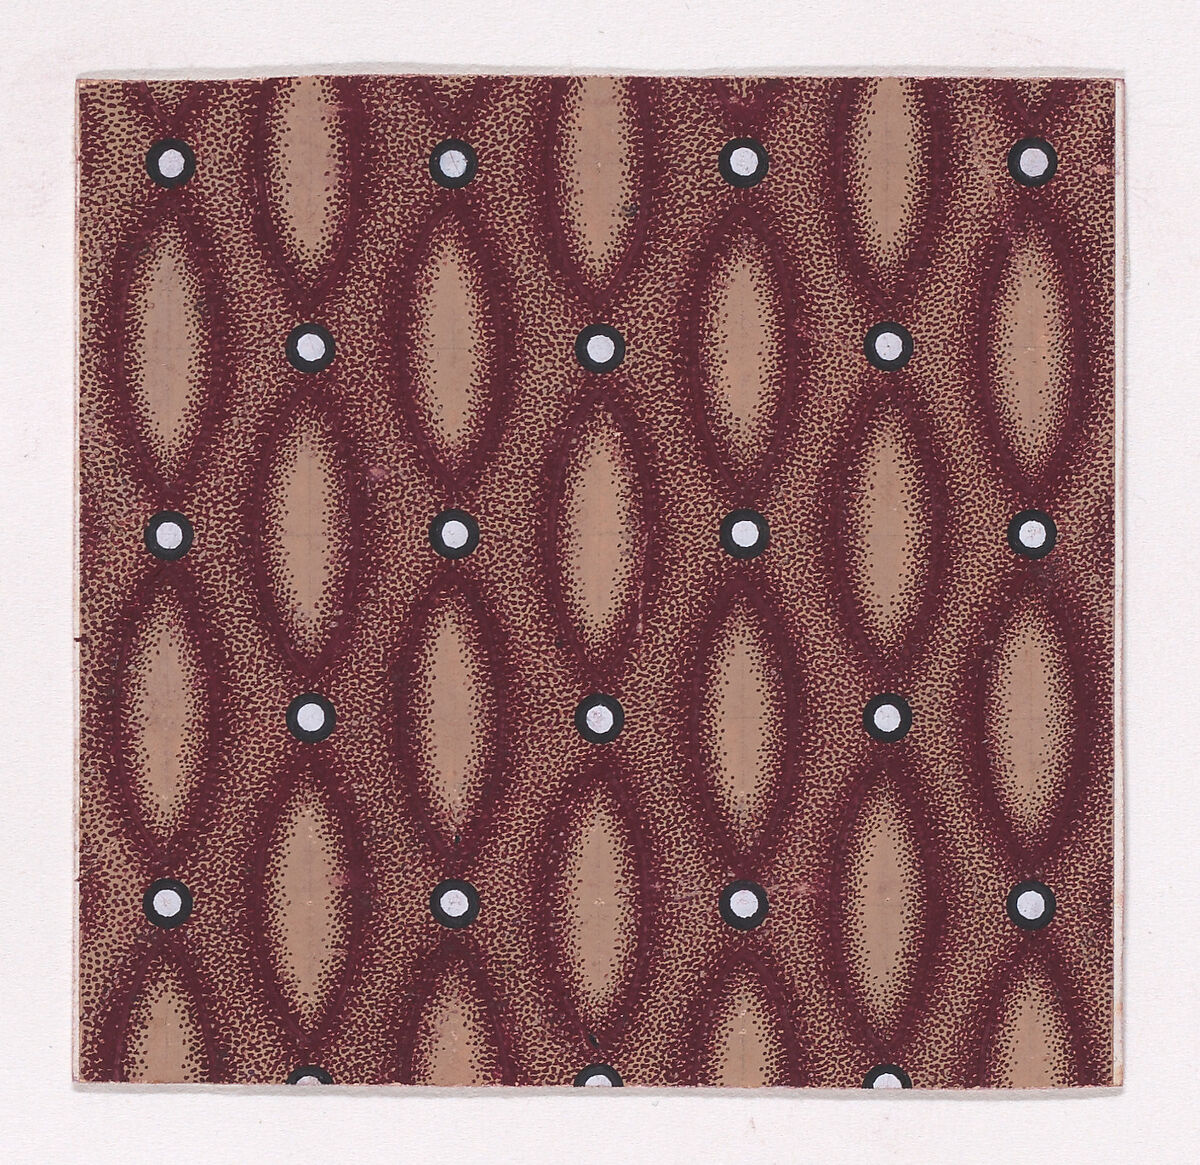 Textile Design with Alternating Vertical Rows of Pearls and Lens Shapes over a Stippled Background, Anonymous, Alsatian, 19th century, Gouache 